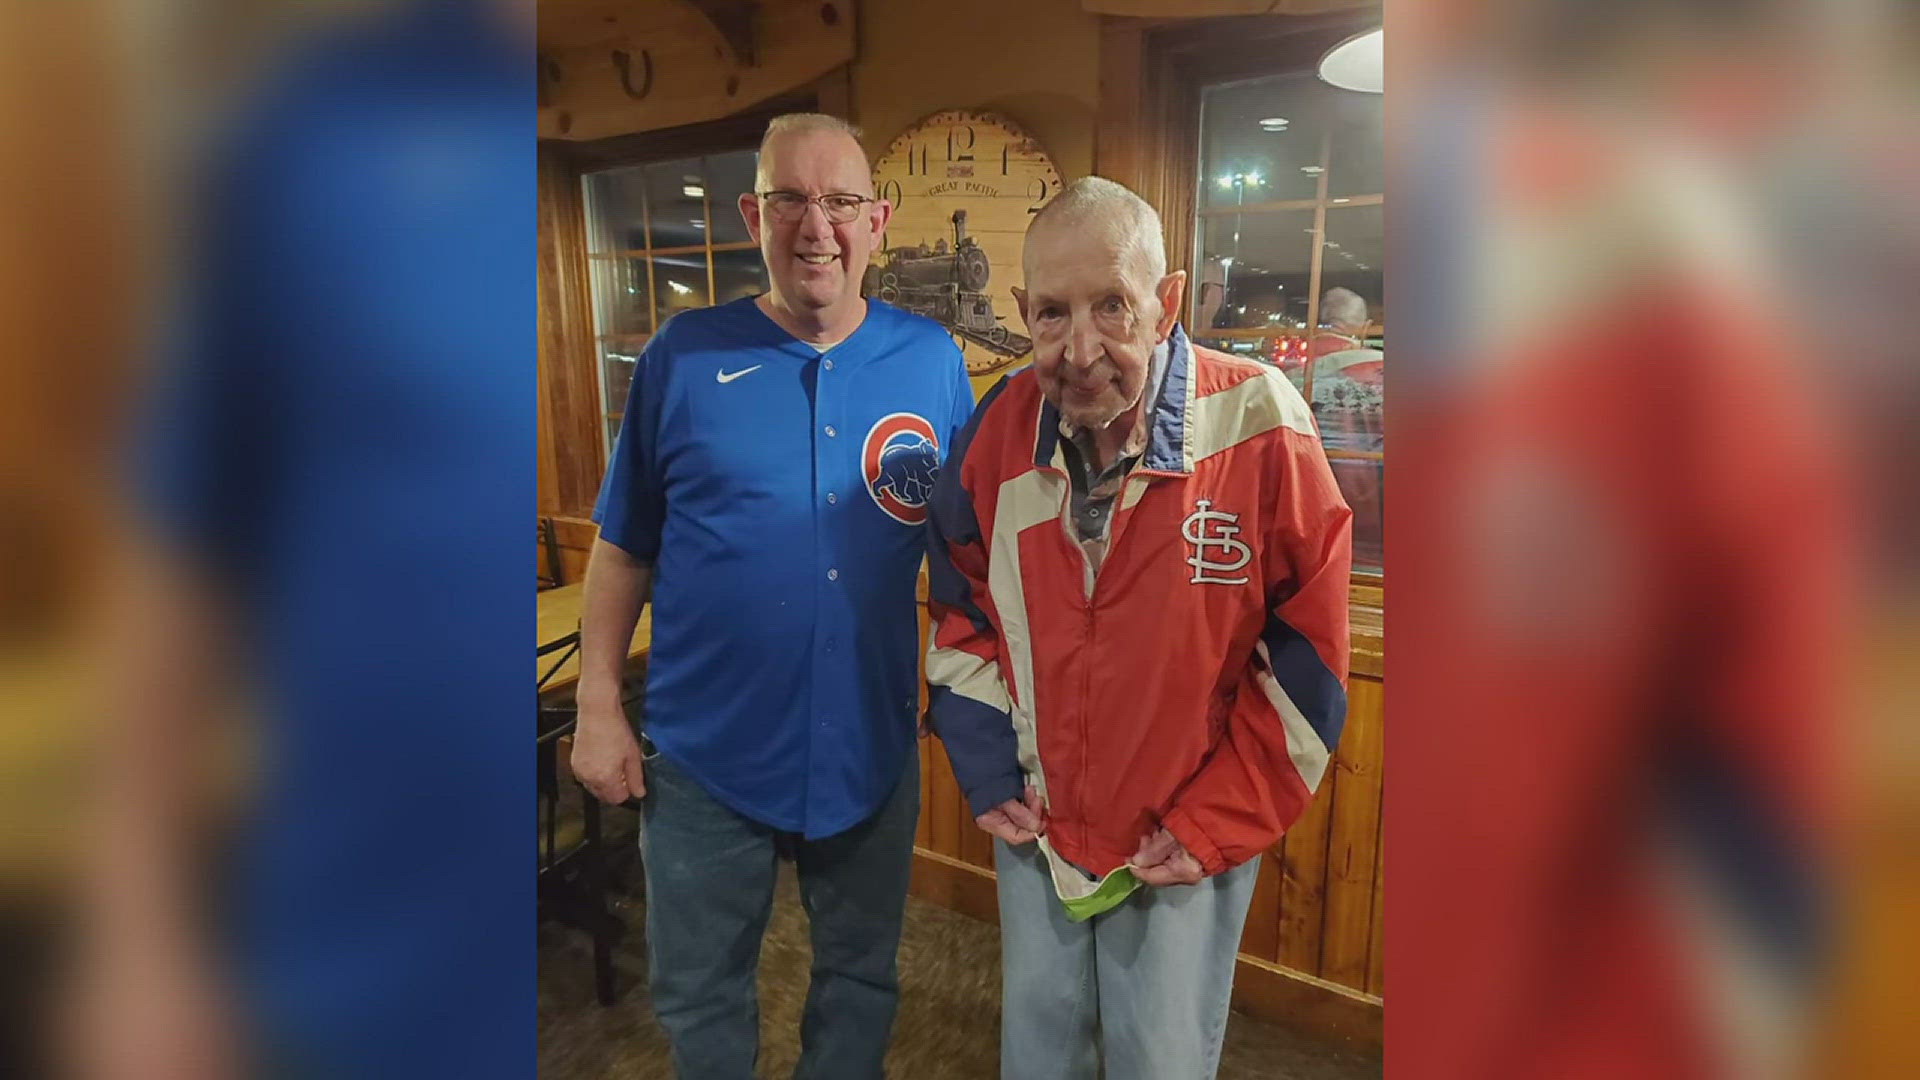 92-year-old William Weber was last seen near the 4500 block of 7th Street in East Moline on Friday, March 29, around 6:00 p.m.